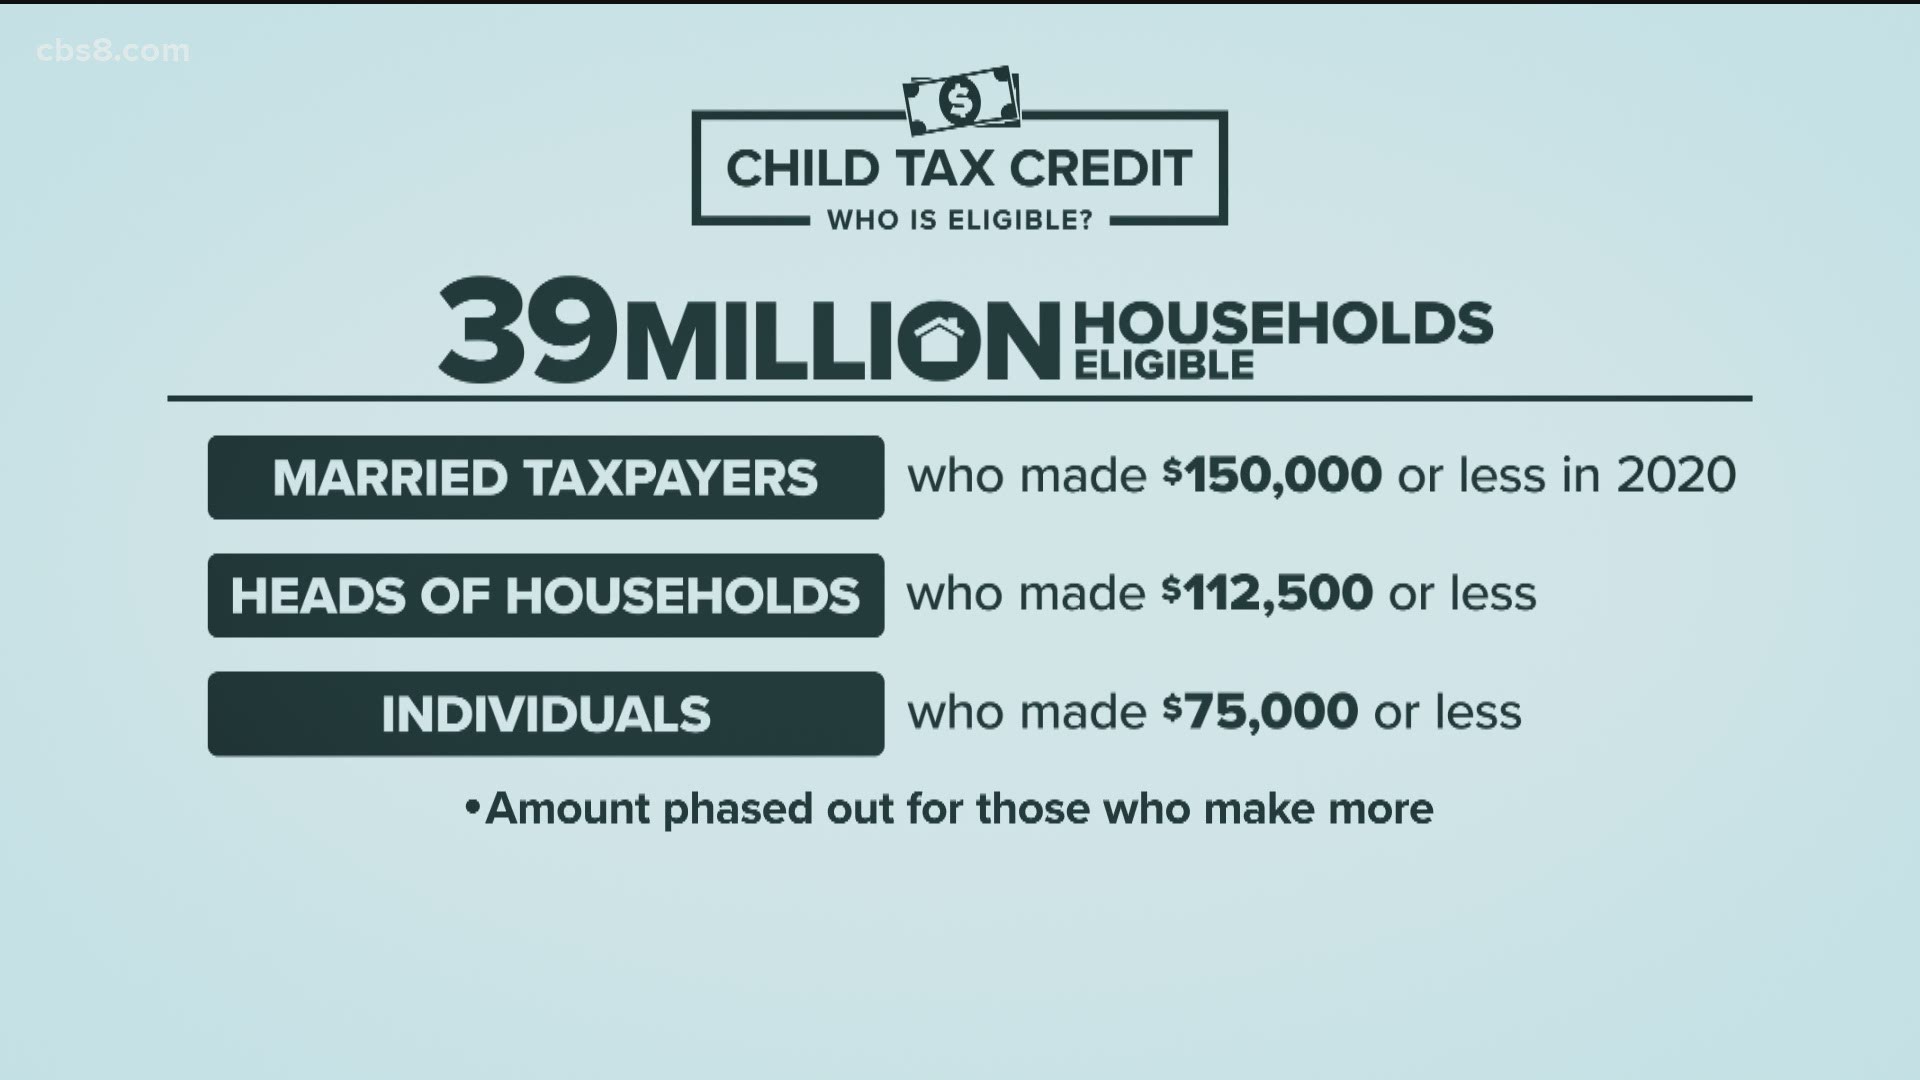 Child tax credit payments start going out Thursday. But who's eligible and what is the application process?